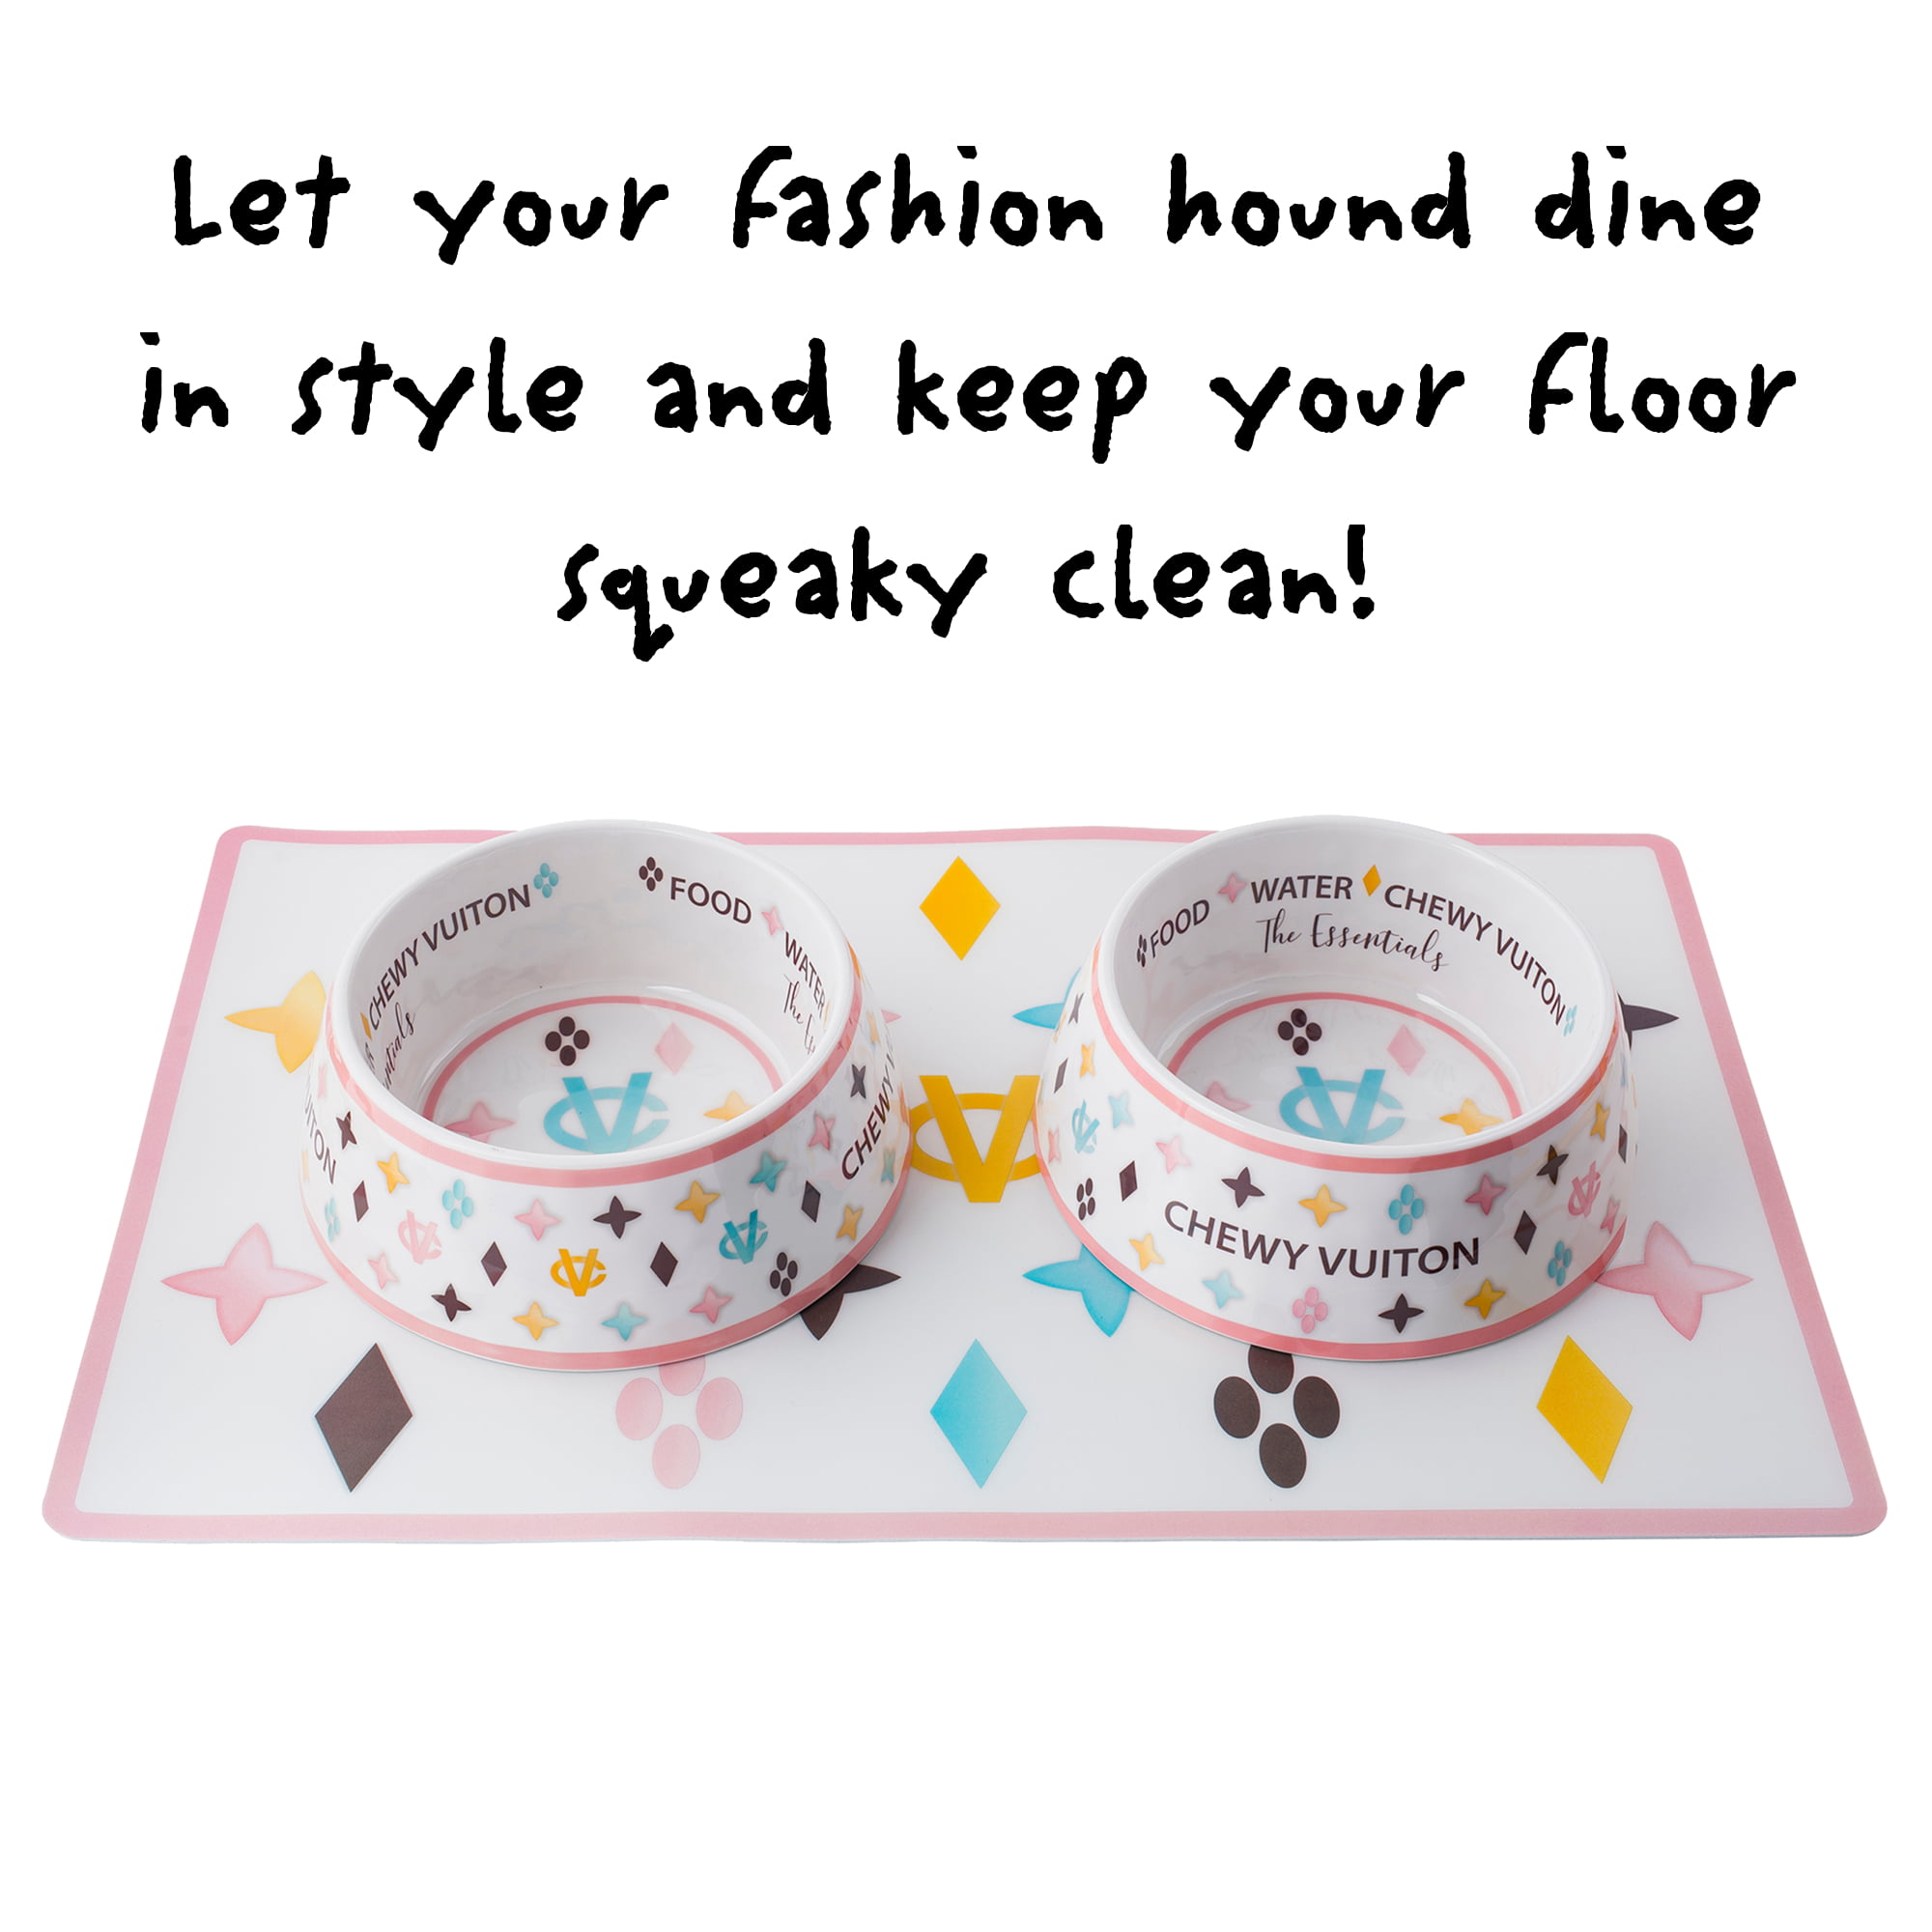  Haute Diggity Dog Bowls & Placemats Collection – Set of 2  Dishwasher Safe, Non-Skid Bowls and 1 Durable Non-Stick Placemat Crafted  from Food Grade, BPA Free Materials with Chic, Fun